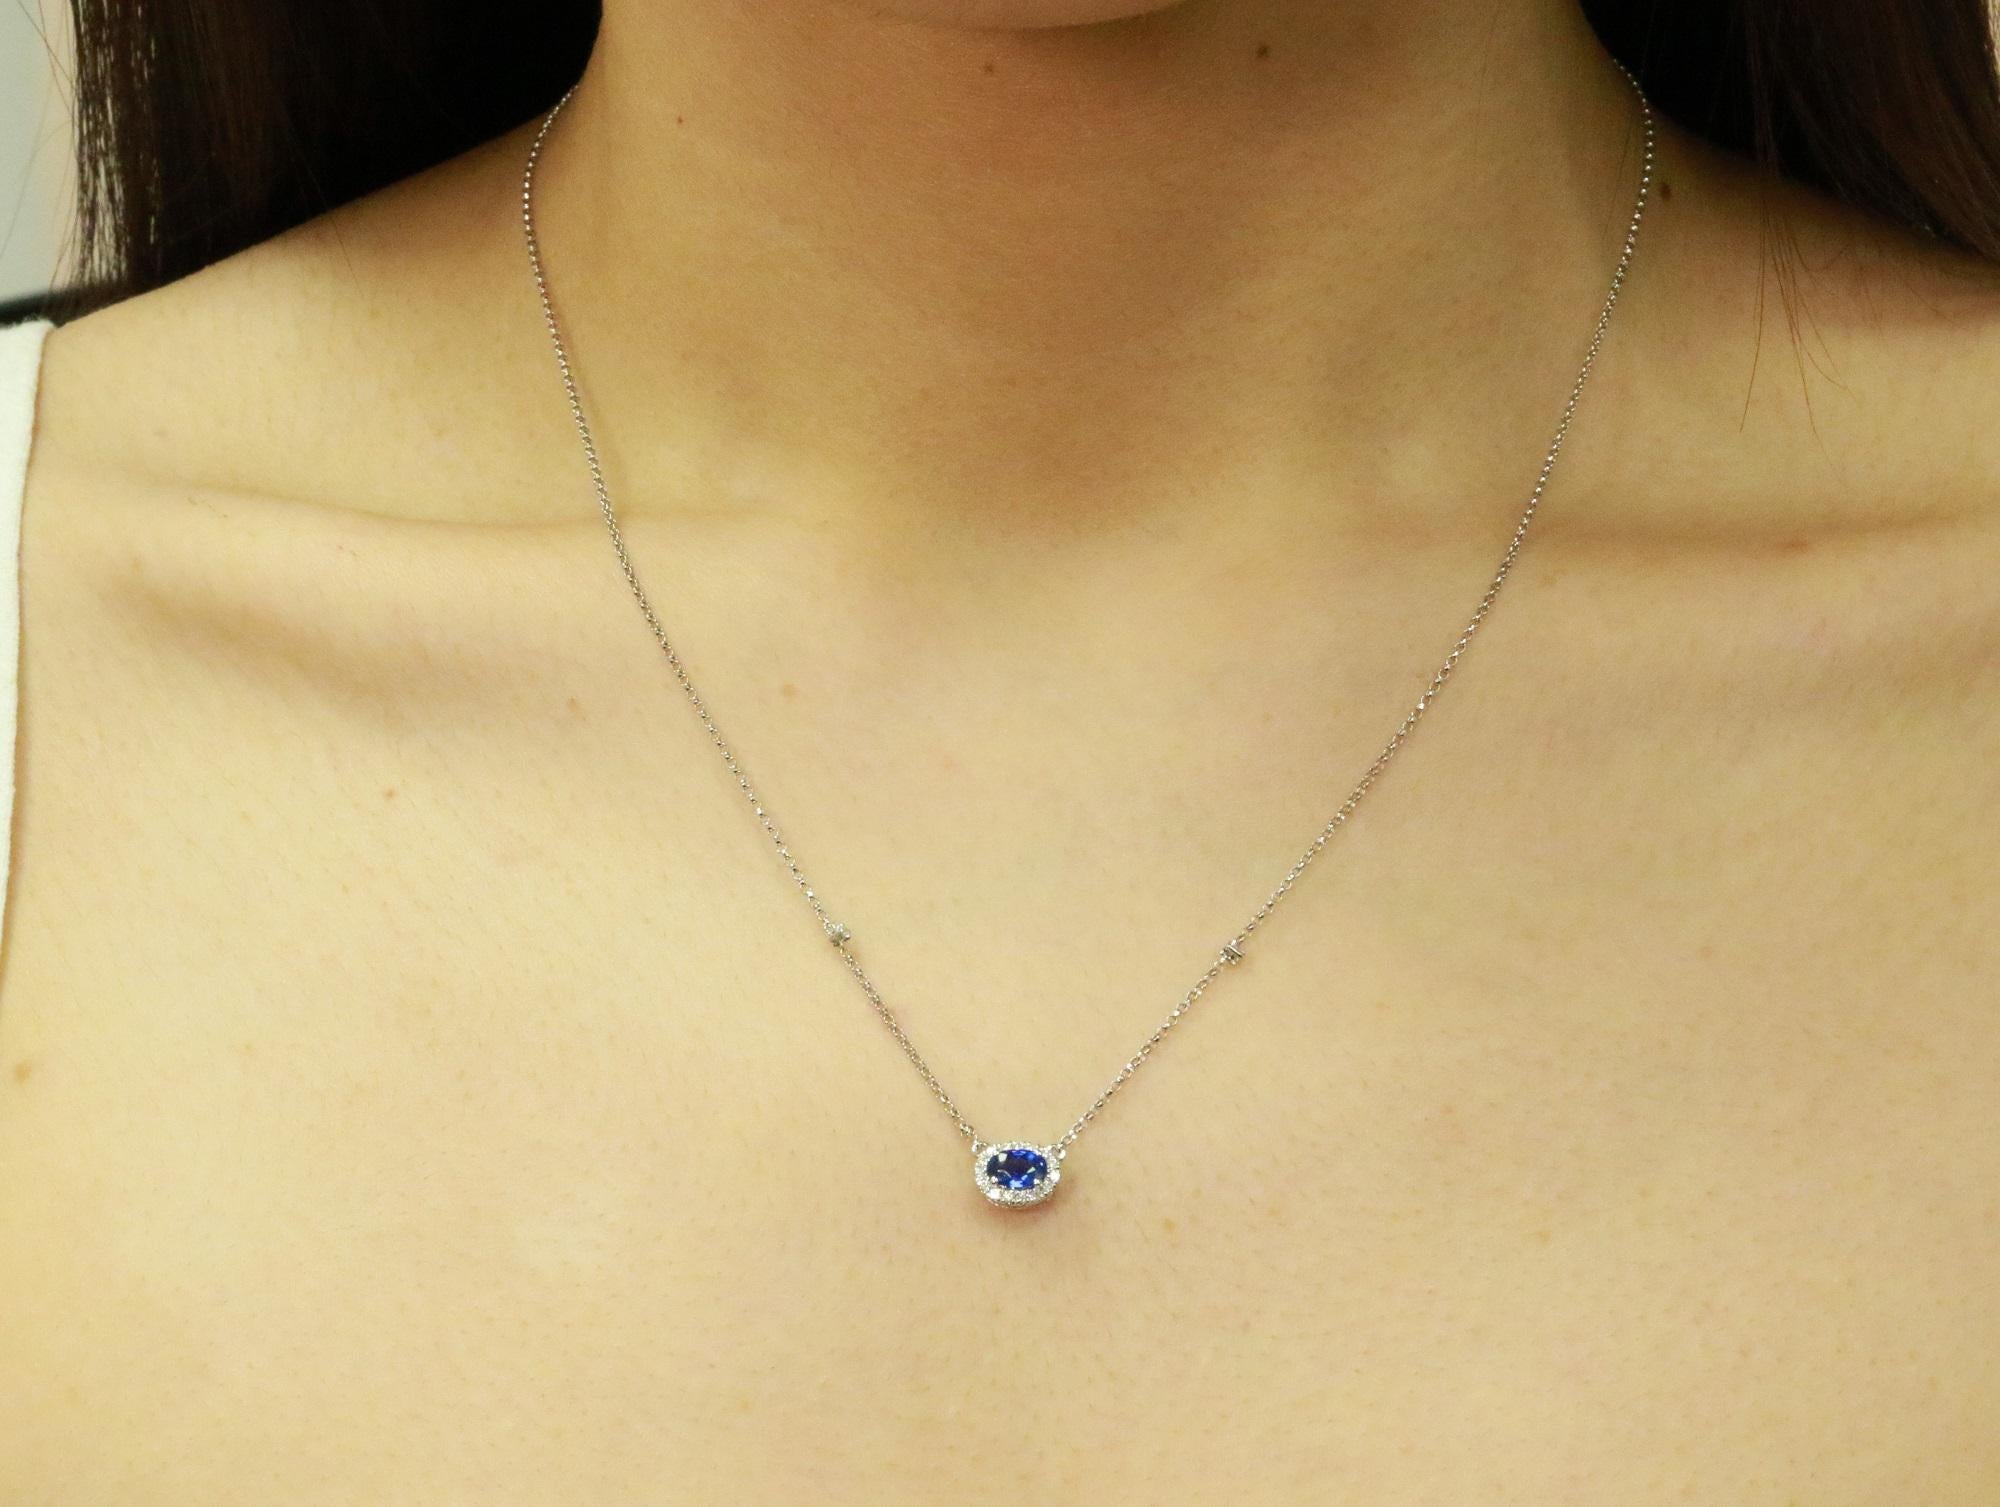 Stunning, timeless and classy eternity Unique Pendant. Decorate yourself in luxury with this Gin & Grace Pendant. This Pendant is made up of Oval-Cut Prong Setting Genuine Blue Sapphire (1 pc) 0.63 Carat and Round-Cut Prong Setting Natural Diamond